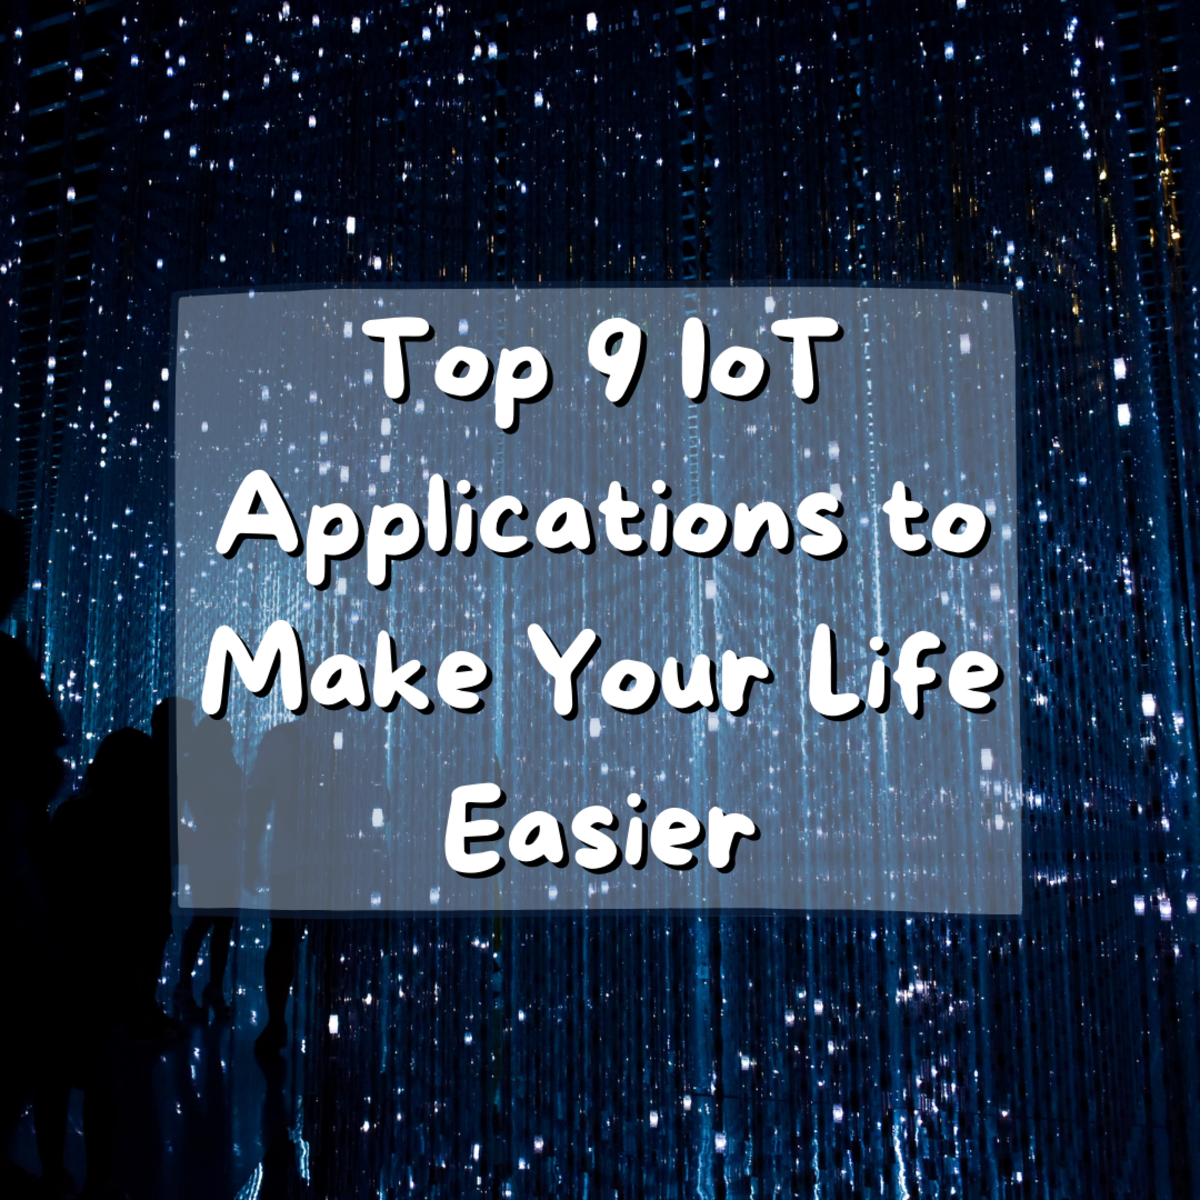 Top 9 IoT Applications to Make Your Life Easier